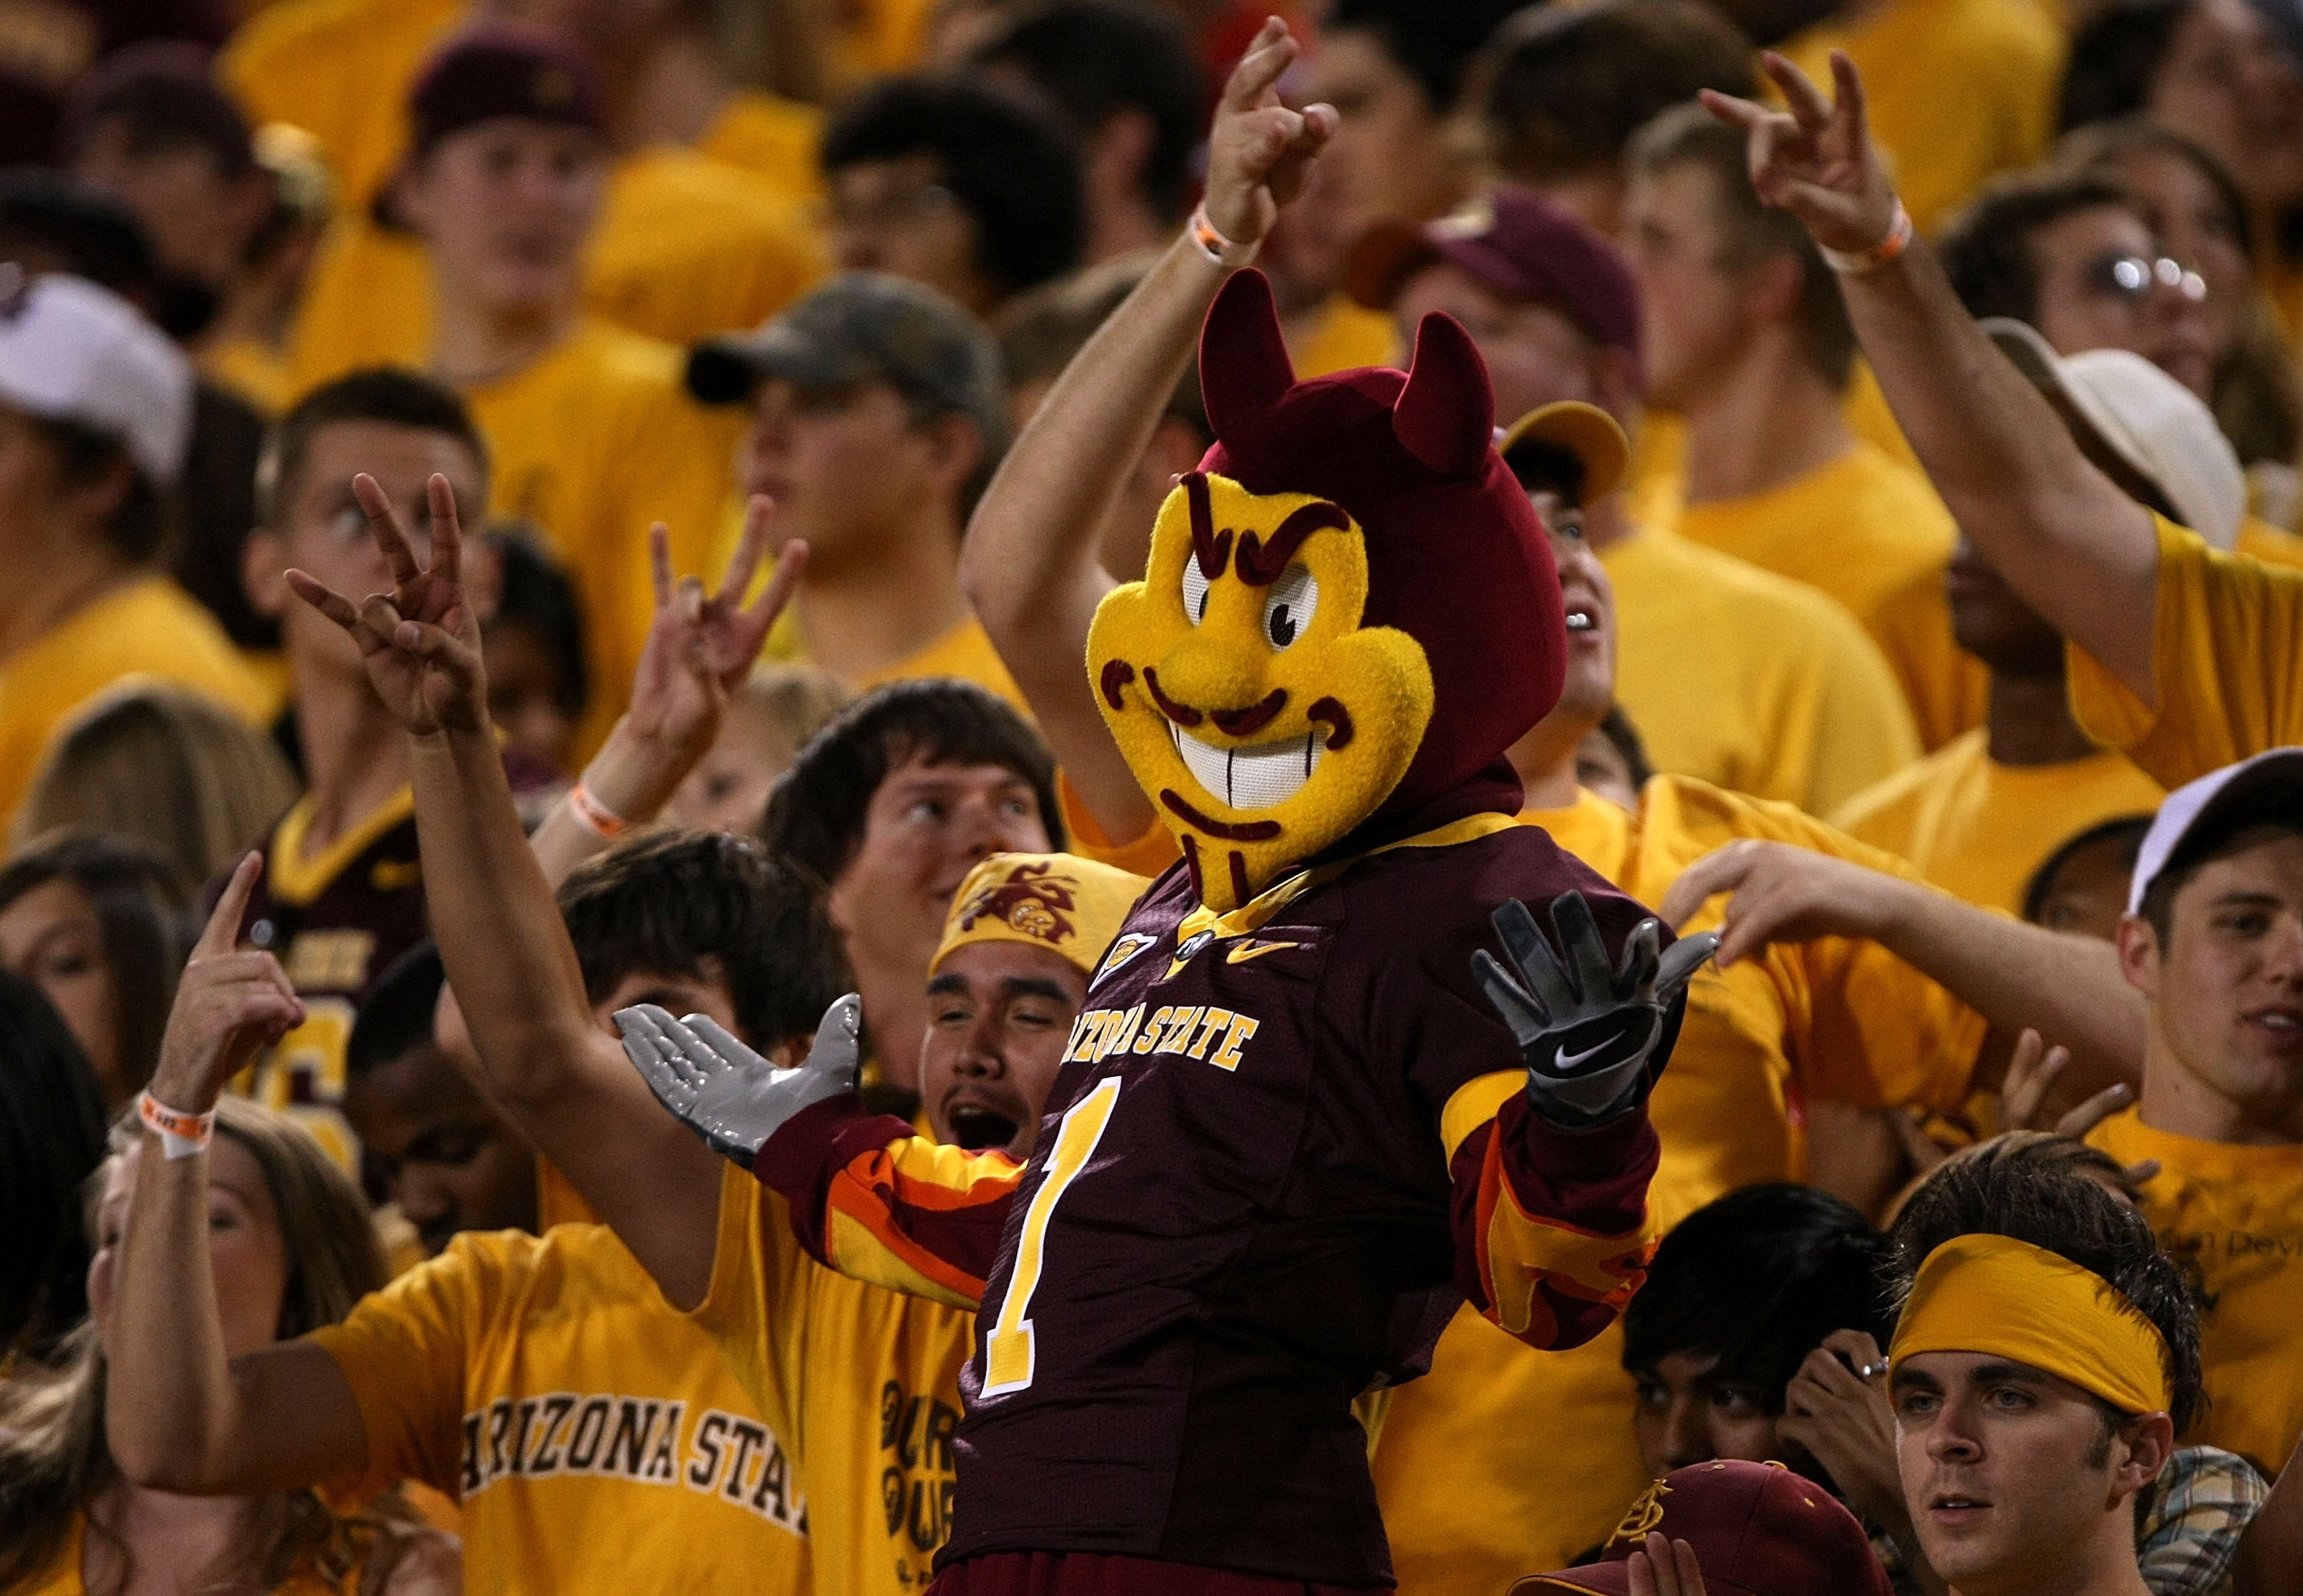 TEMPE, AZ - OCTOBER 13:  'Sparky' the Arizona State Sun Devils mascot does performs in the student section durng the game against the Washington Huskies on October 13, 2007 at Sun Devil Stadium in Tempe, Arizona.  Arizona State won 44-20.  (Photo by Steph